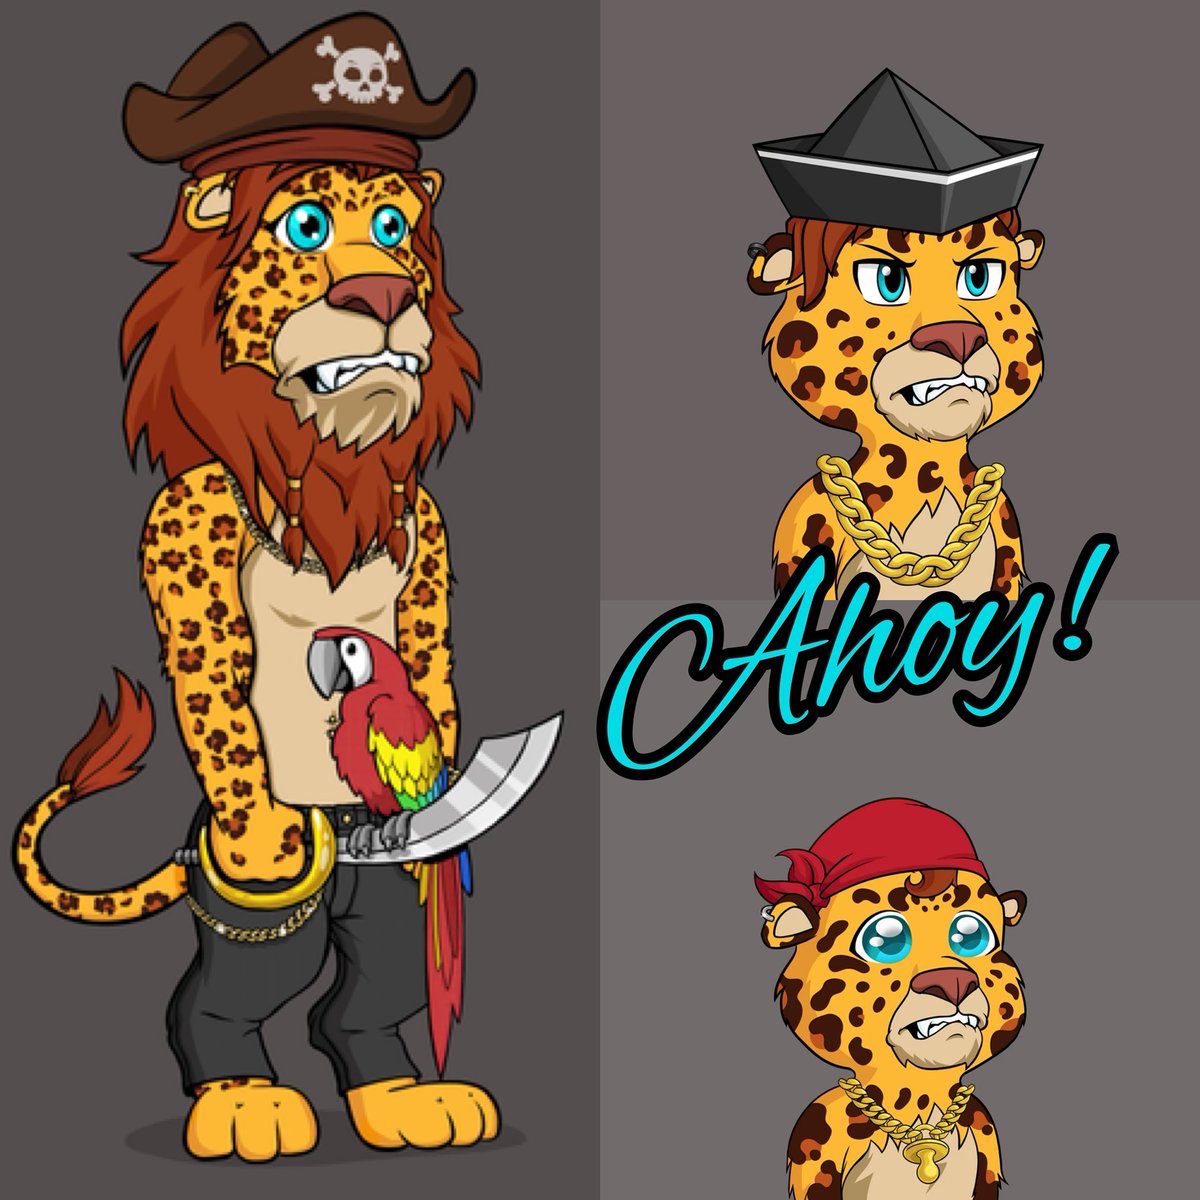 Ahoy! #FullSetFriday 
Let’s #ROAR into the weekend! 
@Cocopride_eth @LazyCrewGang